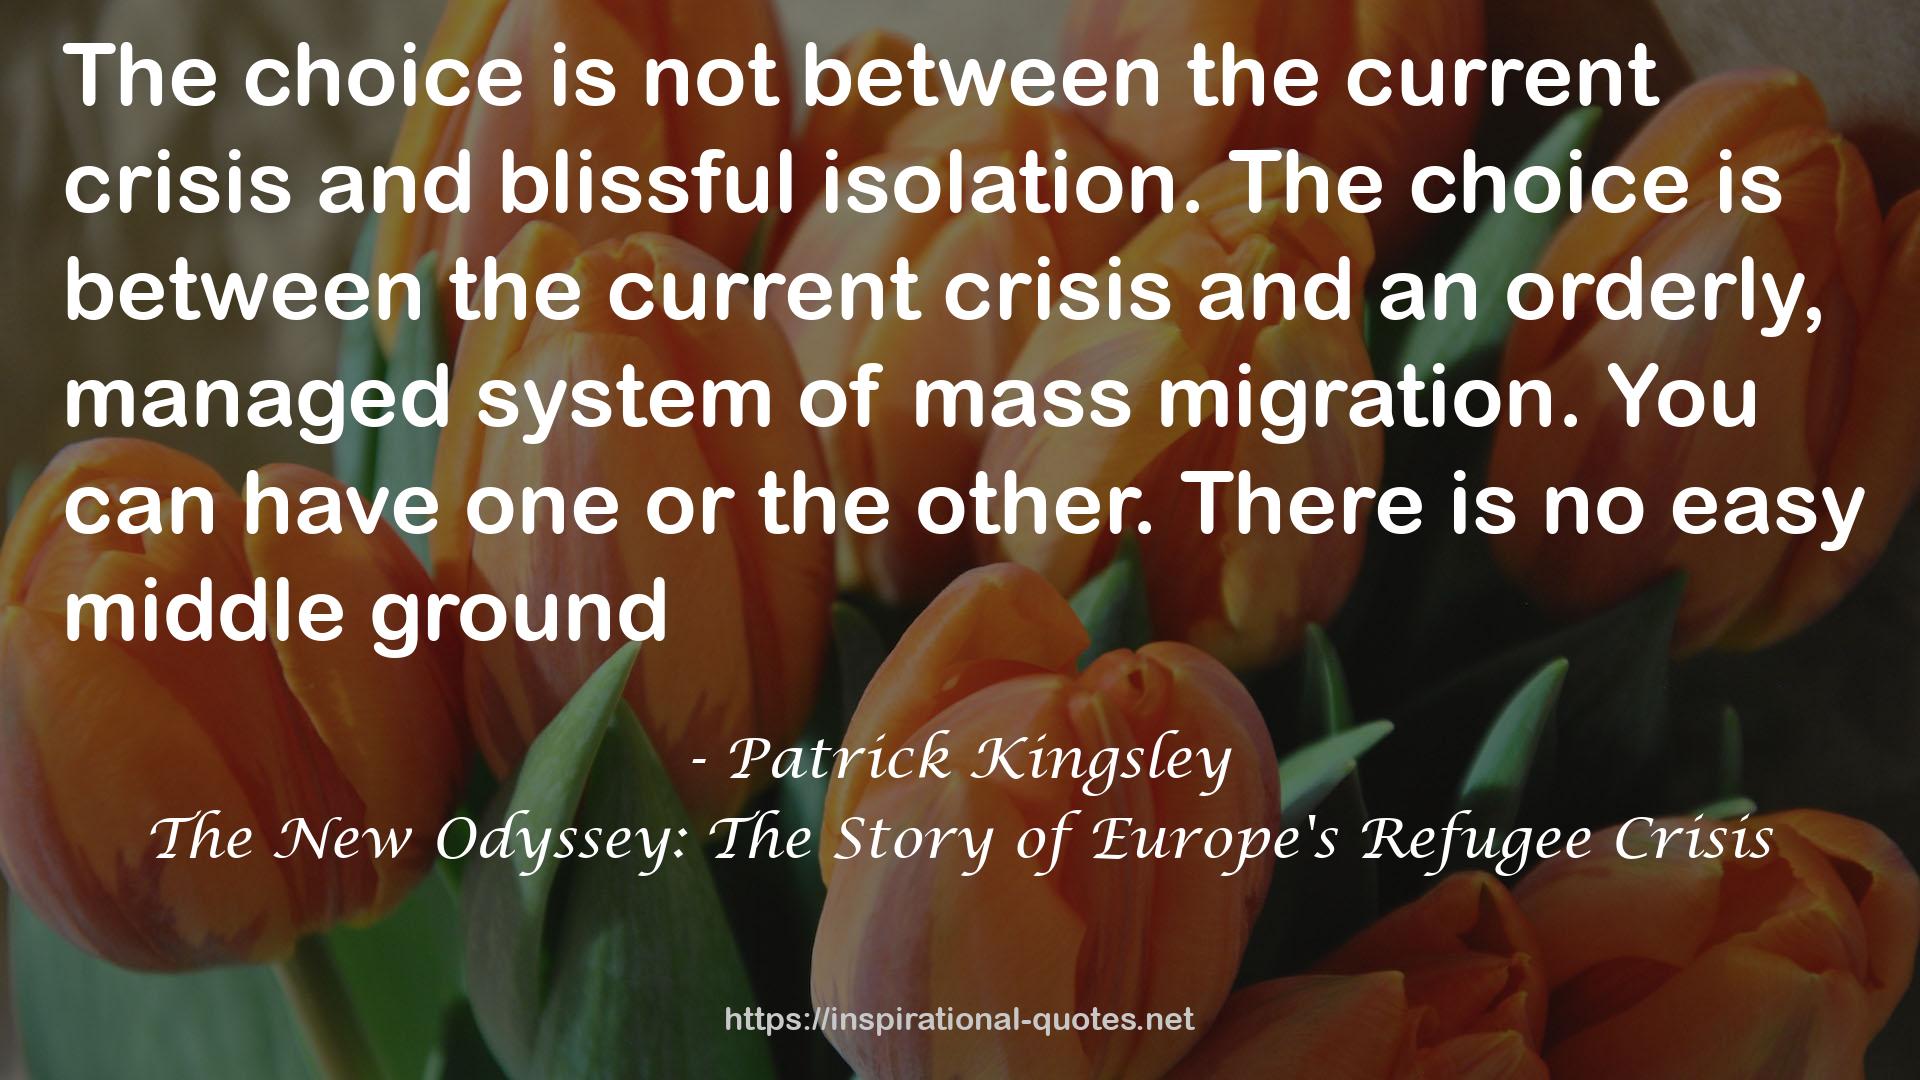 The New Odyssey: The Story of Europe's Refugee Crisis QUOTES